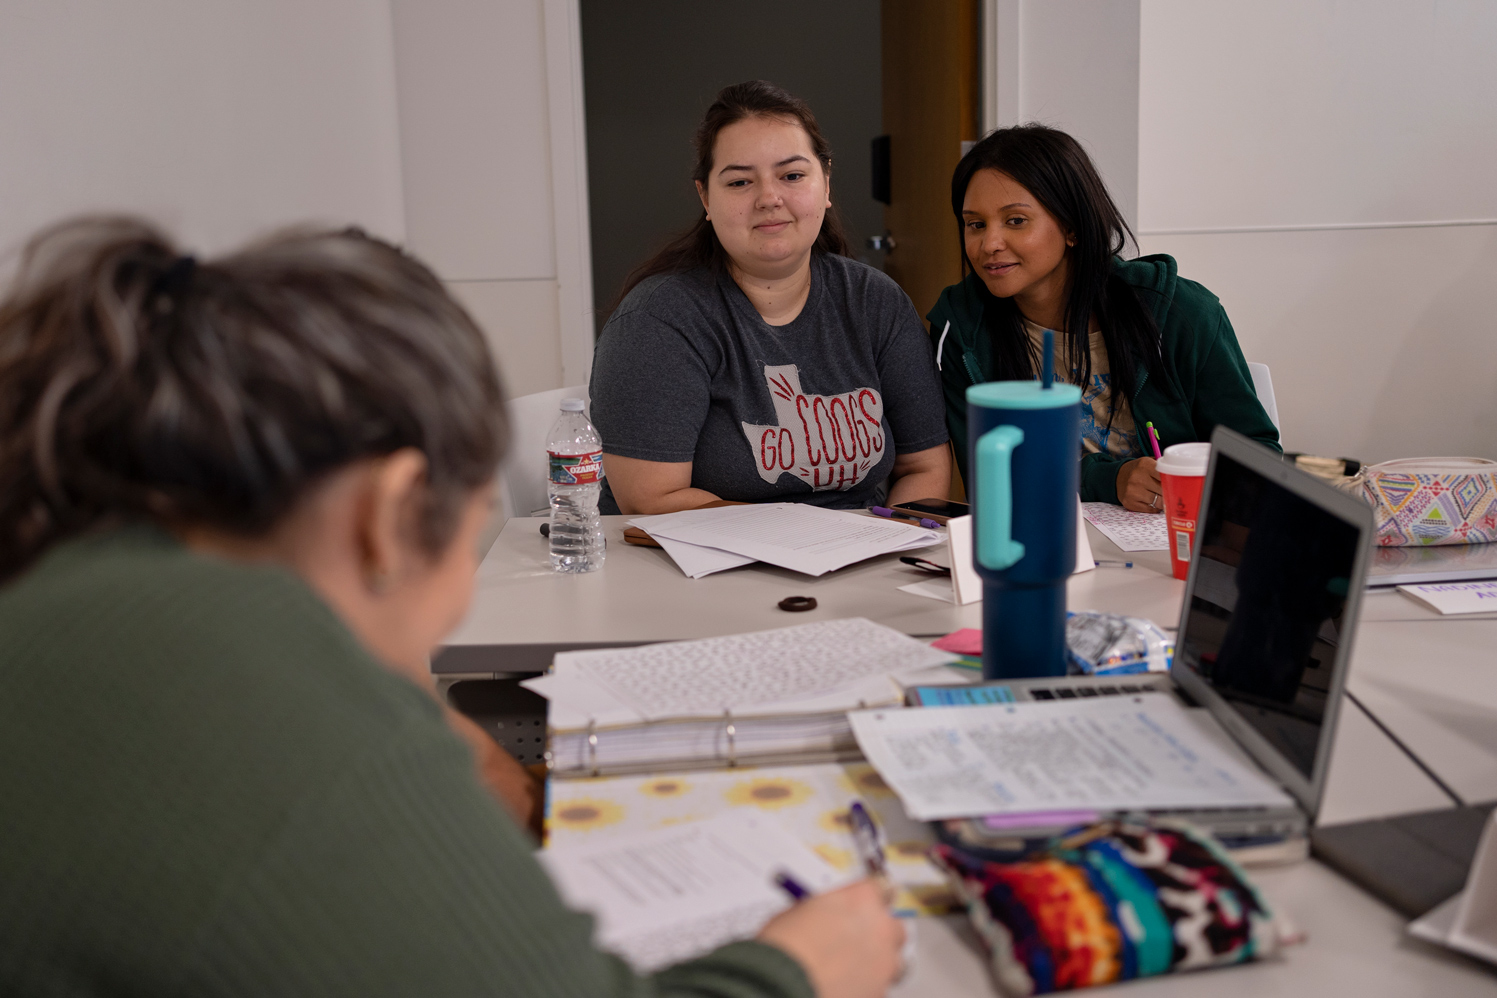 Brisette Casas, left, and Nadine Adams, right, look at fellow classmates working on an exercise together during a teacher-certification class with seniors at the University of Houston.